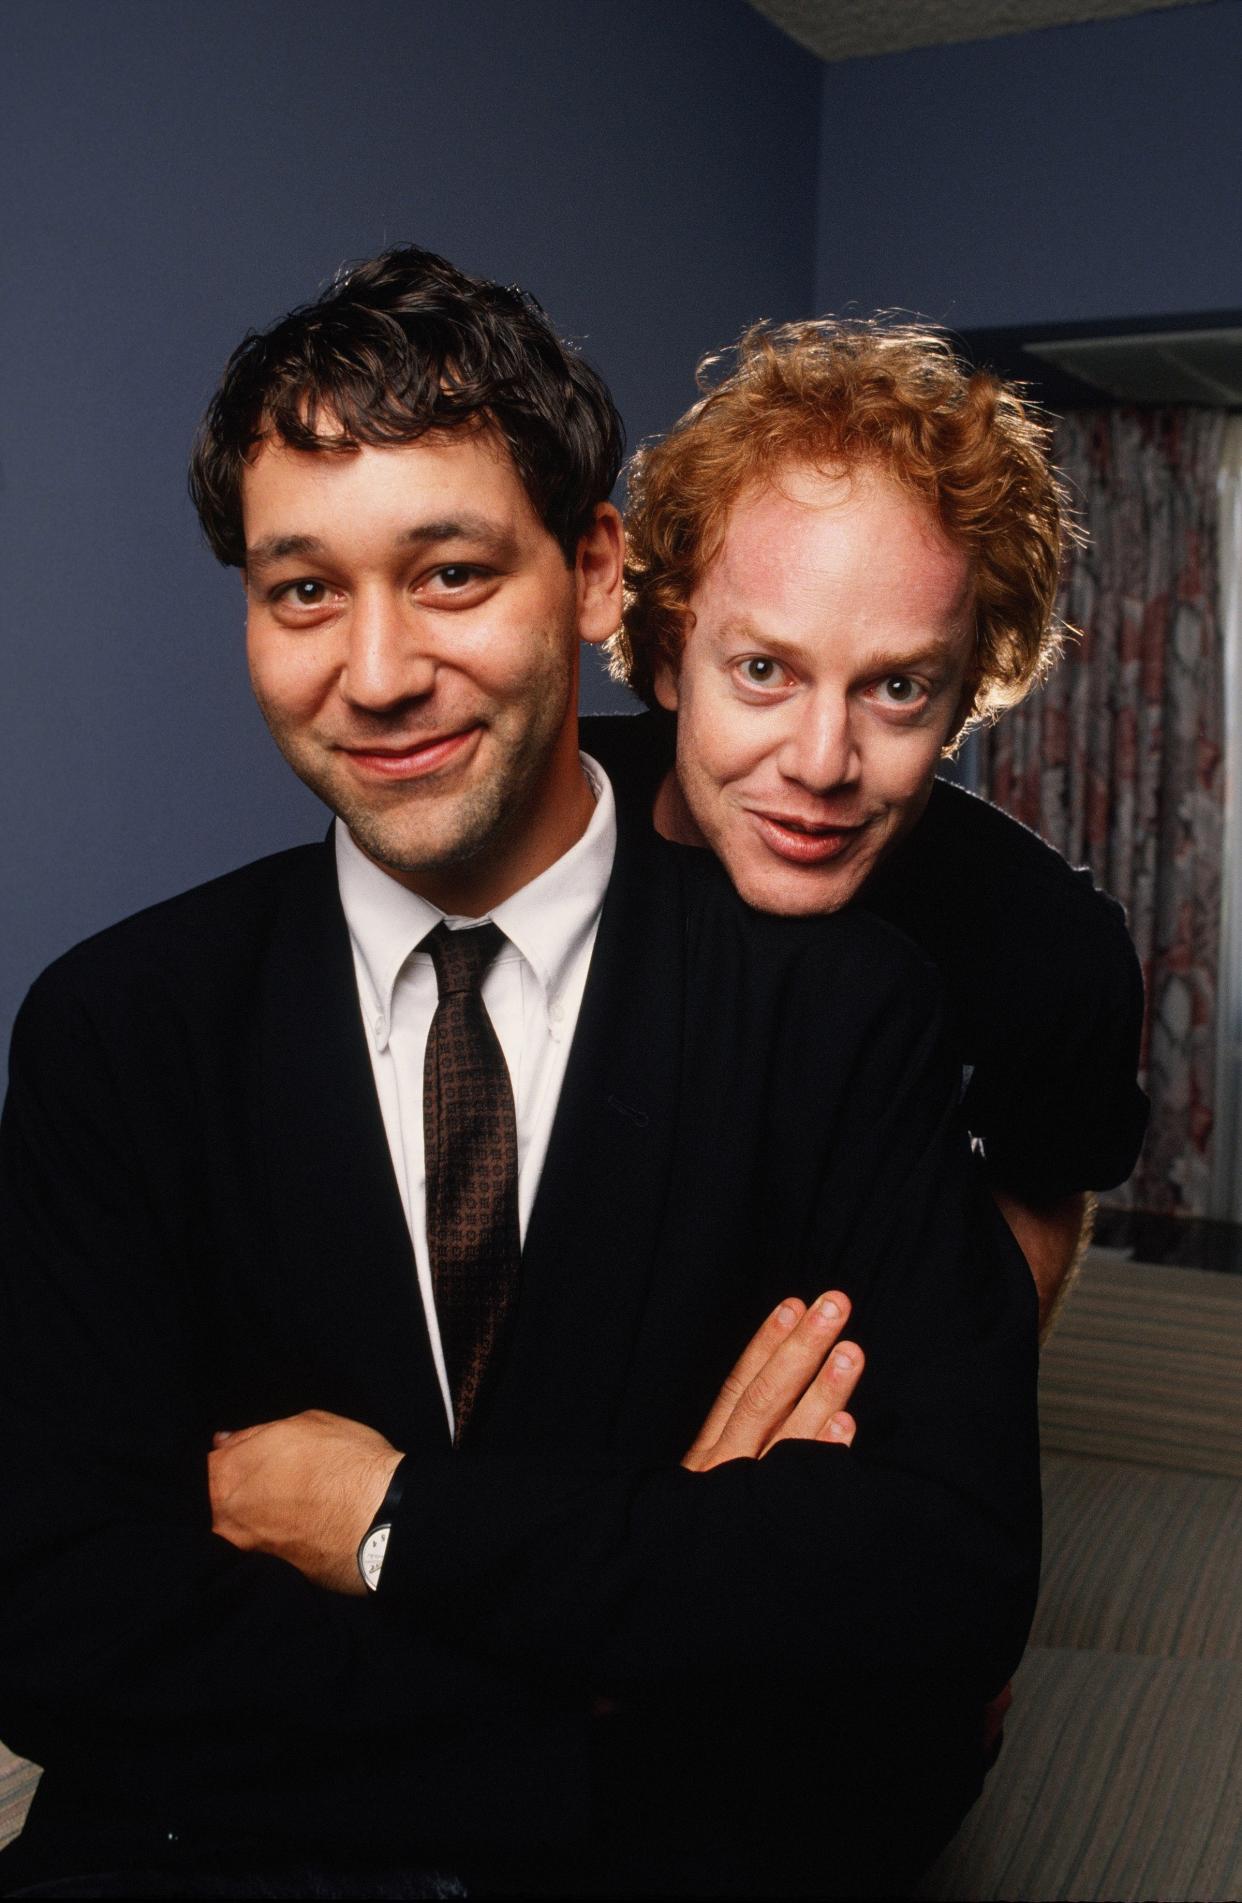 BEVERLY HILLS, CA - 1990:  Film Director Sam Raimi (left) and film composer Danny Elfman get playful during a 1990 Beverly Hills, California, photo portrait session. Raimi is best known for the 